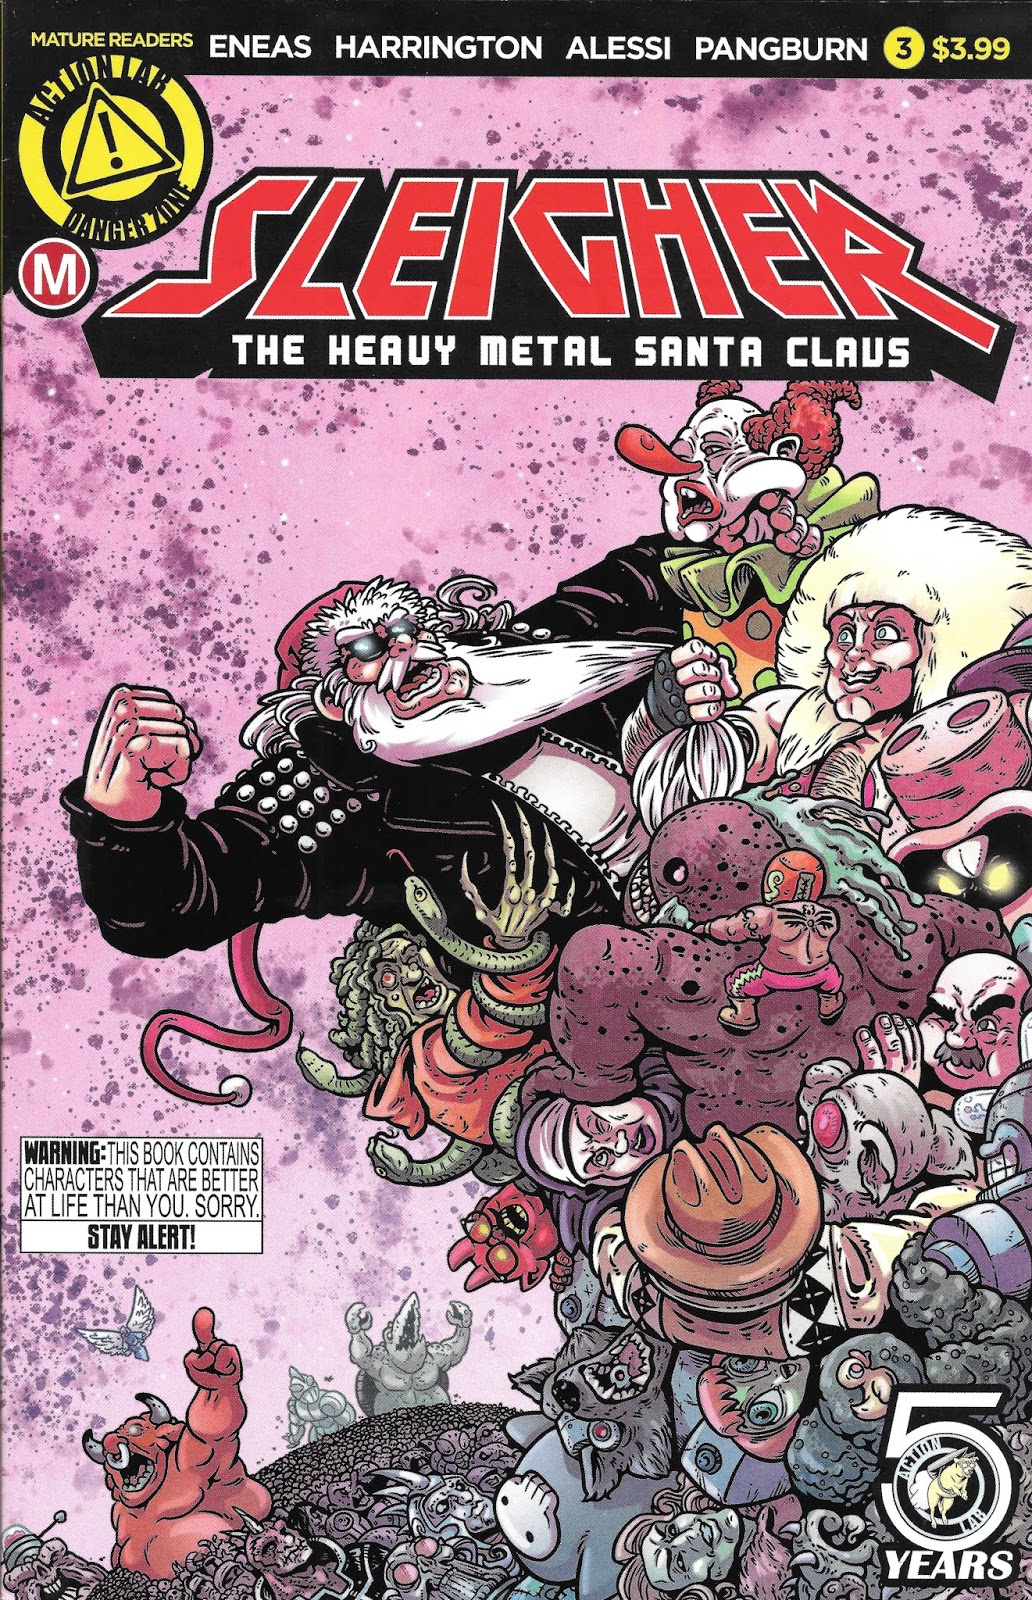 The Crapbox Of Son Of Cthulhu Sleigher The Heavy Metal Santa Claus 3